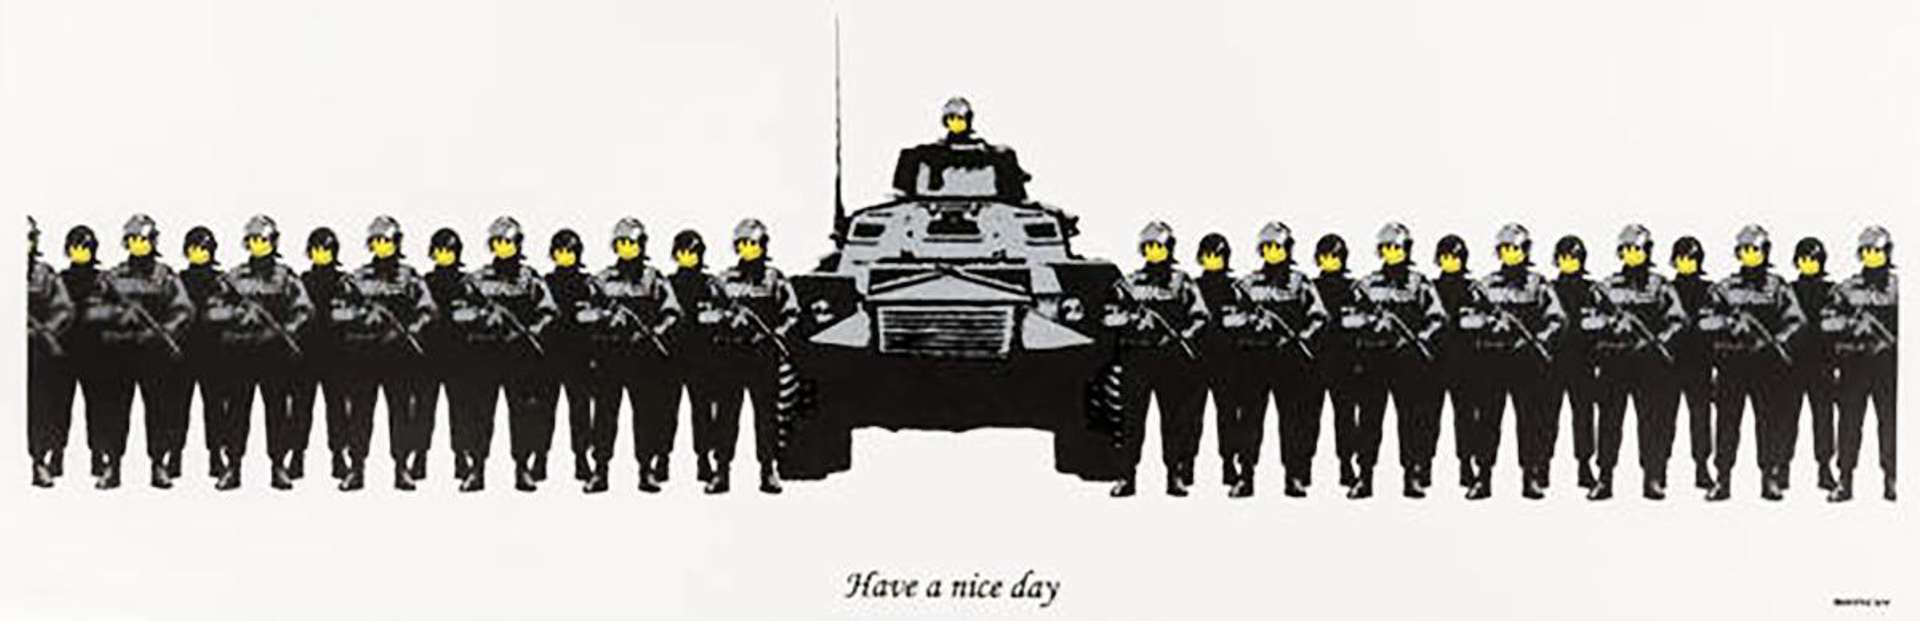 Have A Nice Day (Anarchist Book Fair) - Signed Print by Banksy 2003 - MyArtBroker